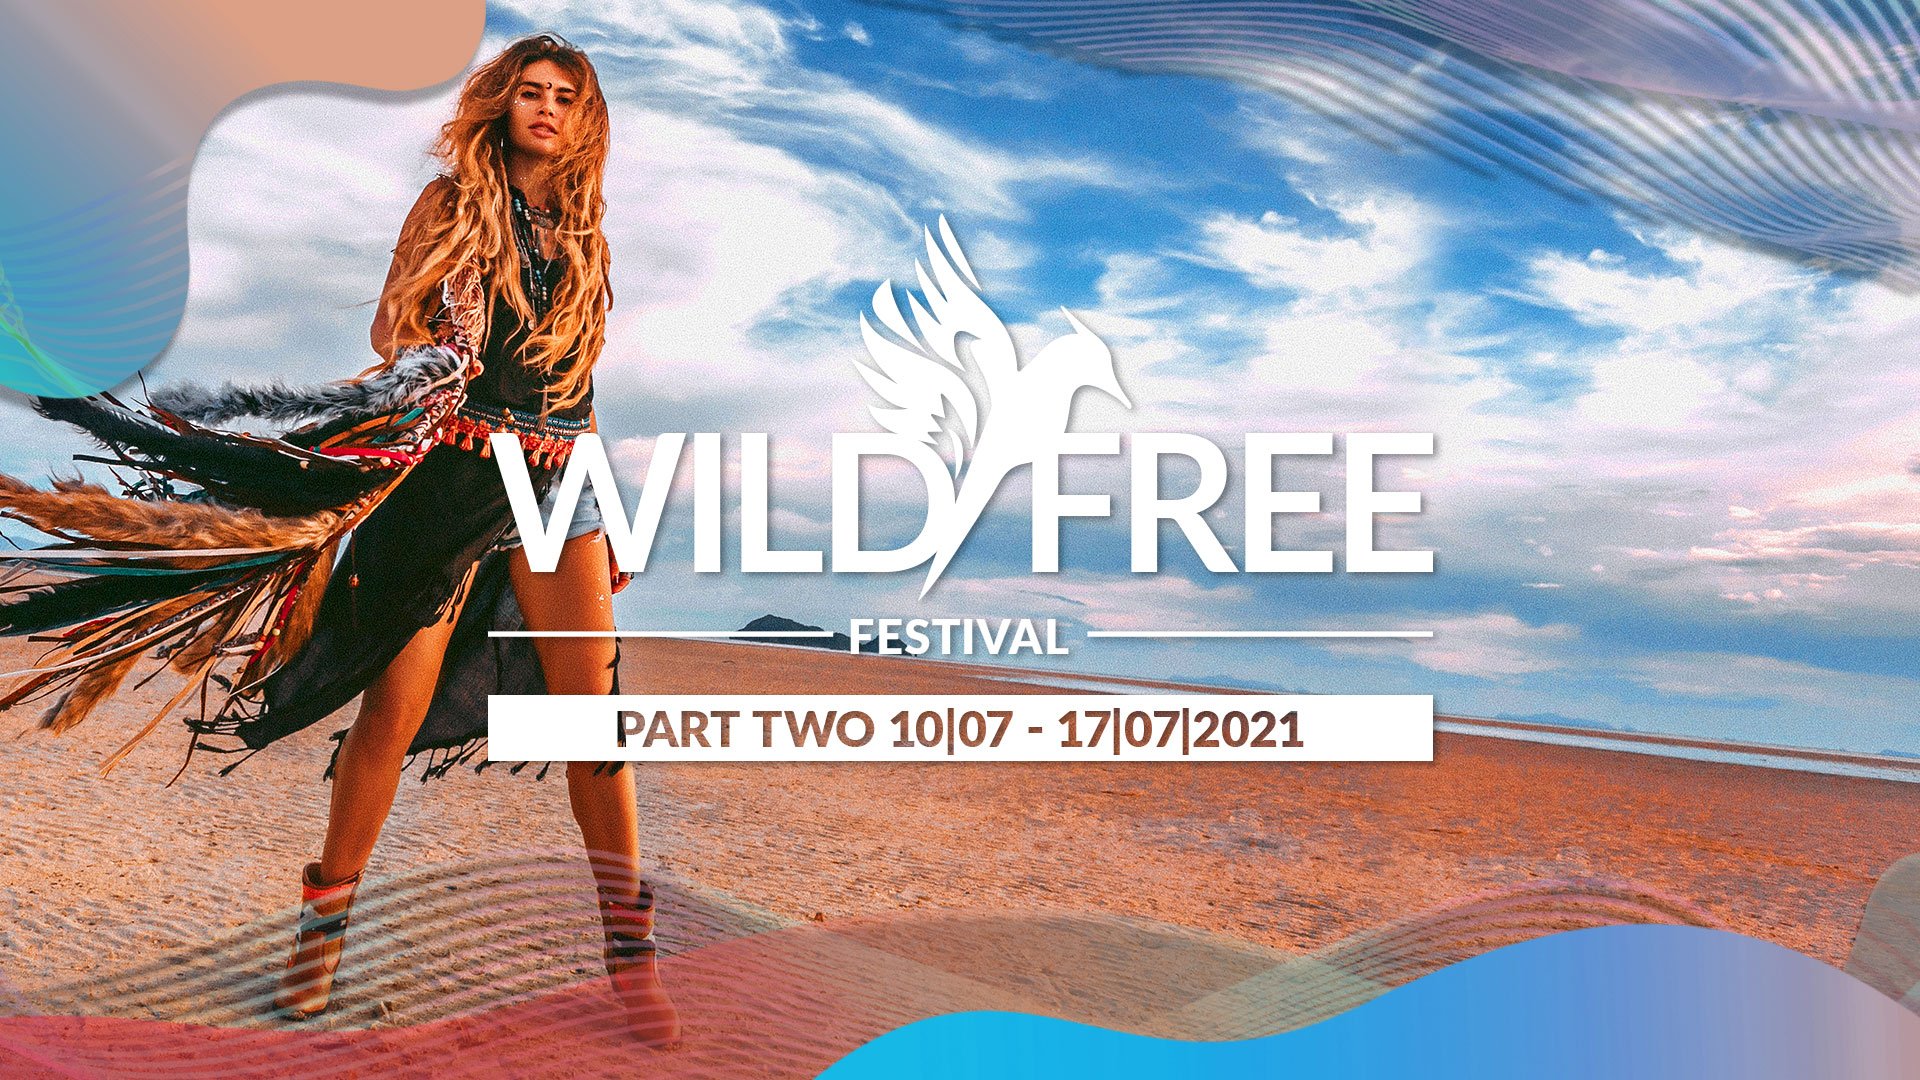 Wild and Free Festival 2021 – Parte 2